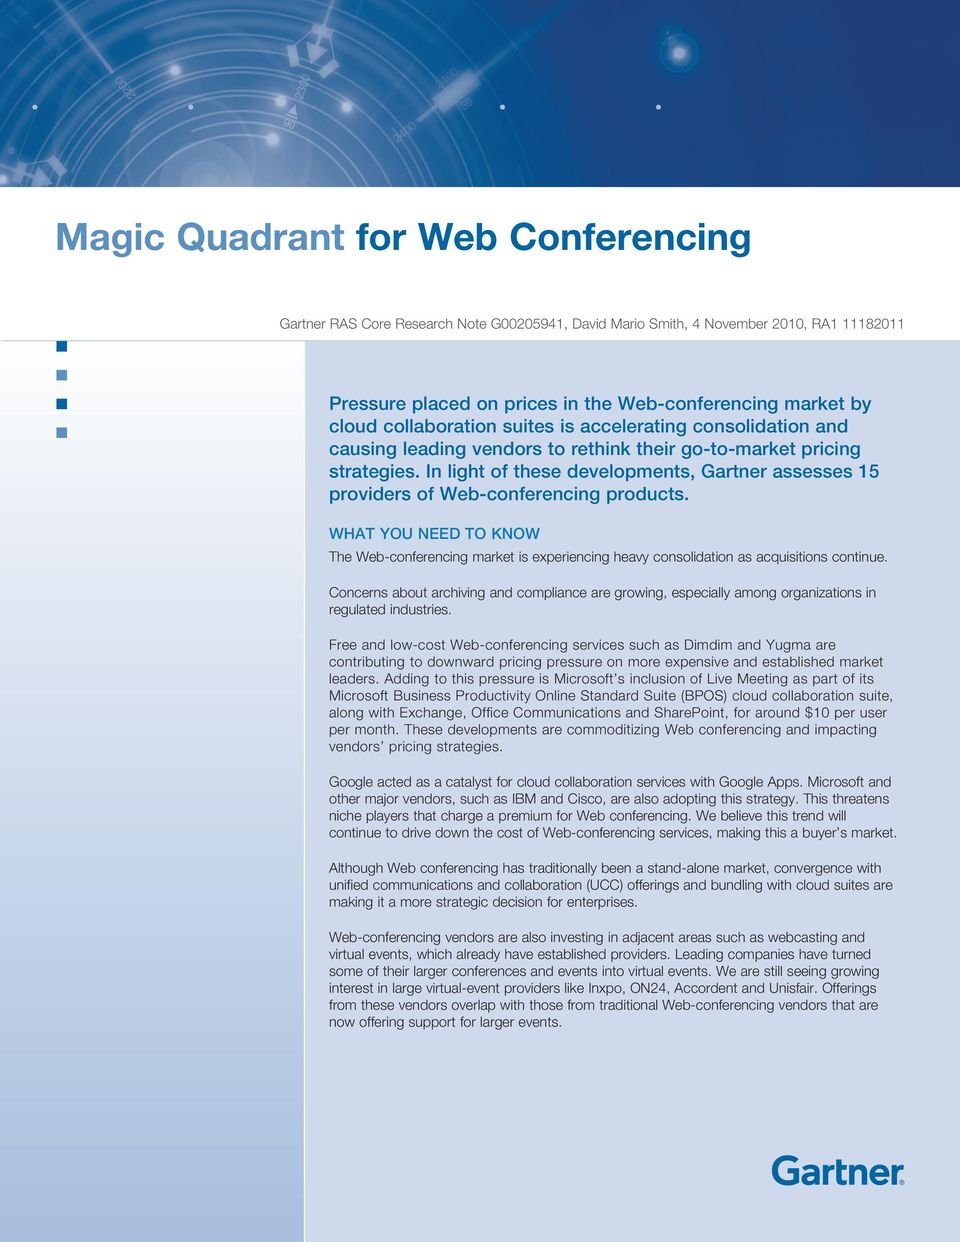 In light of these developments, Gartner assesses 15 providers of Web-conferencing products.